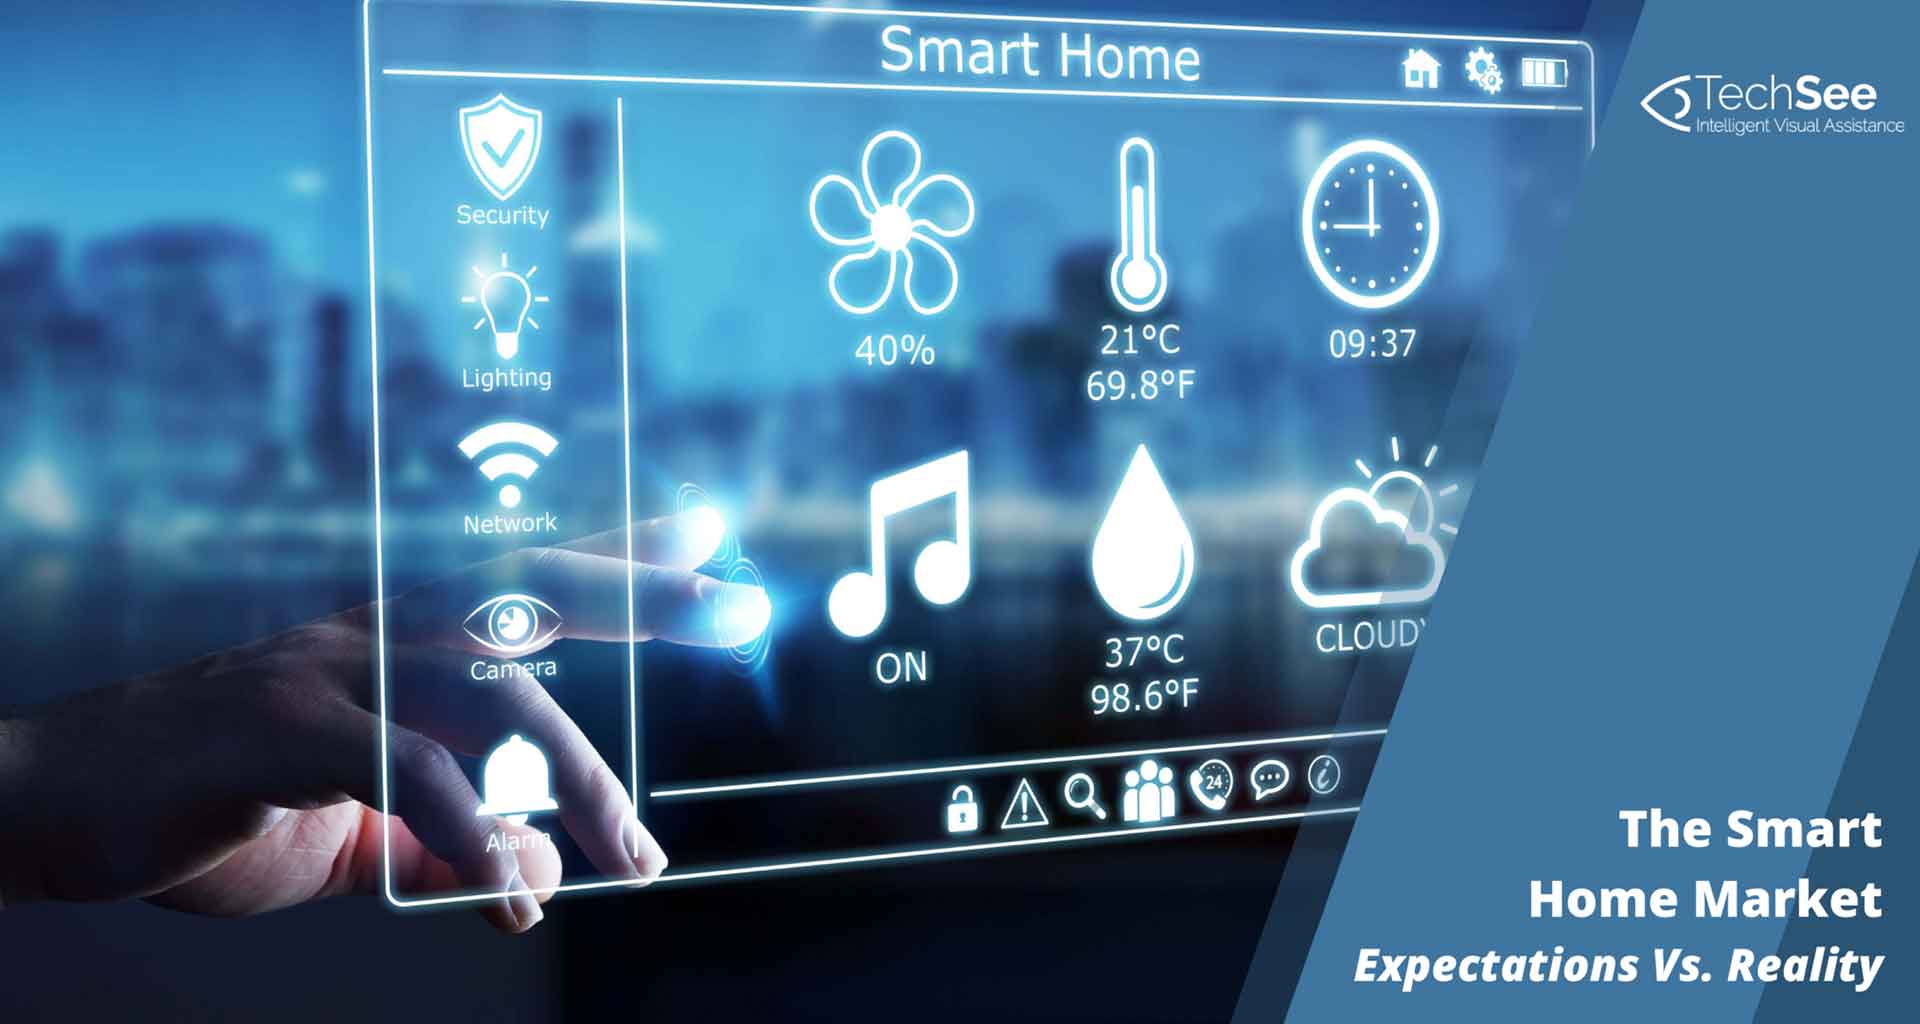 The Smart Home Market: Expectations vs. Reality